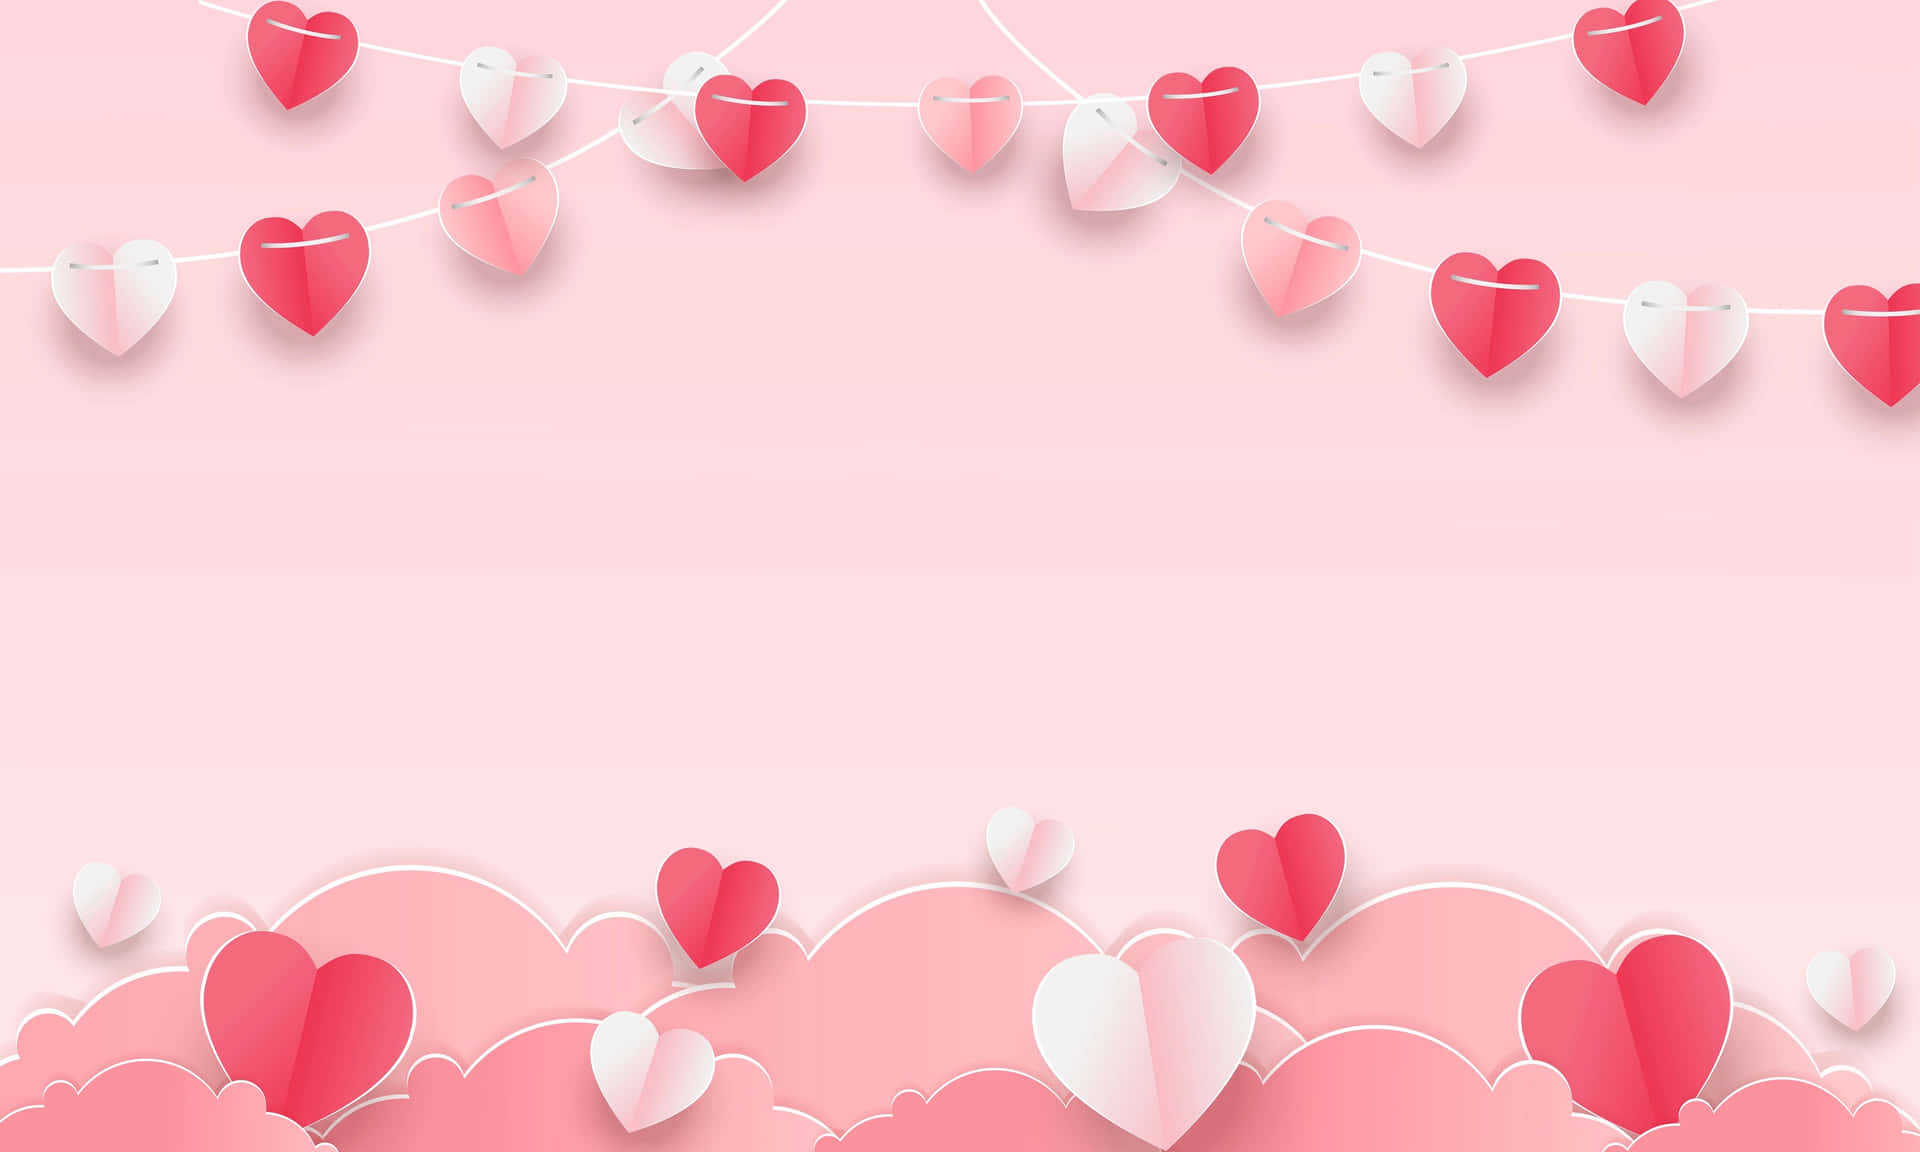 affection wallpapers